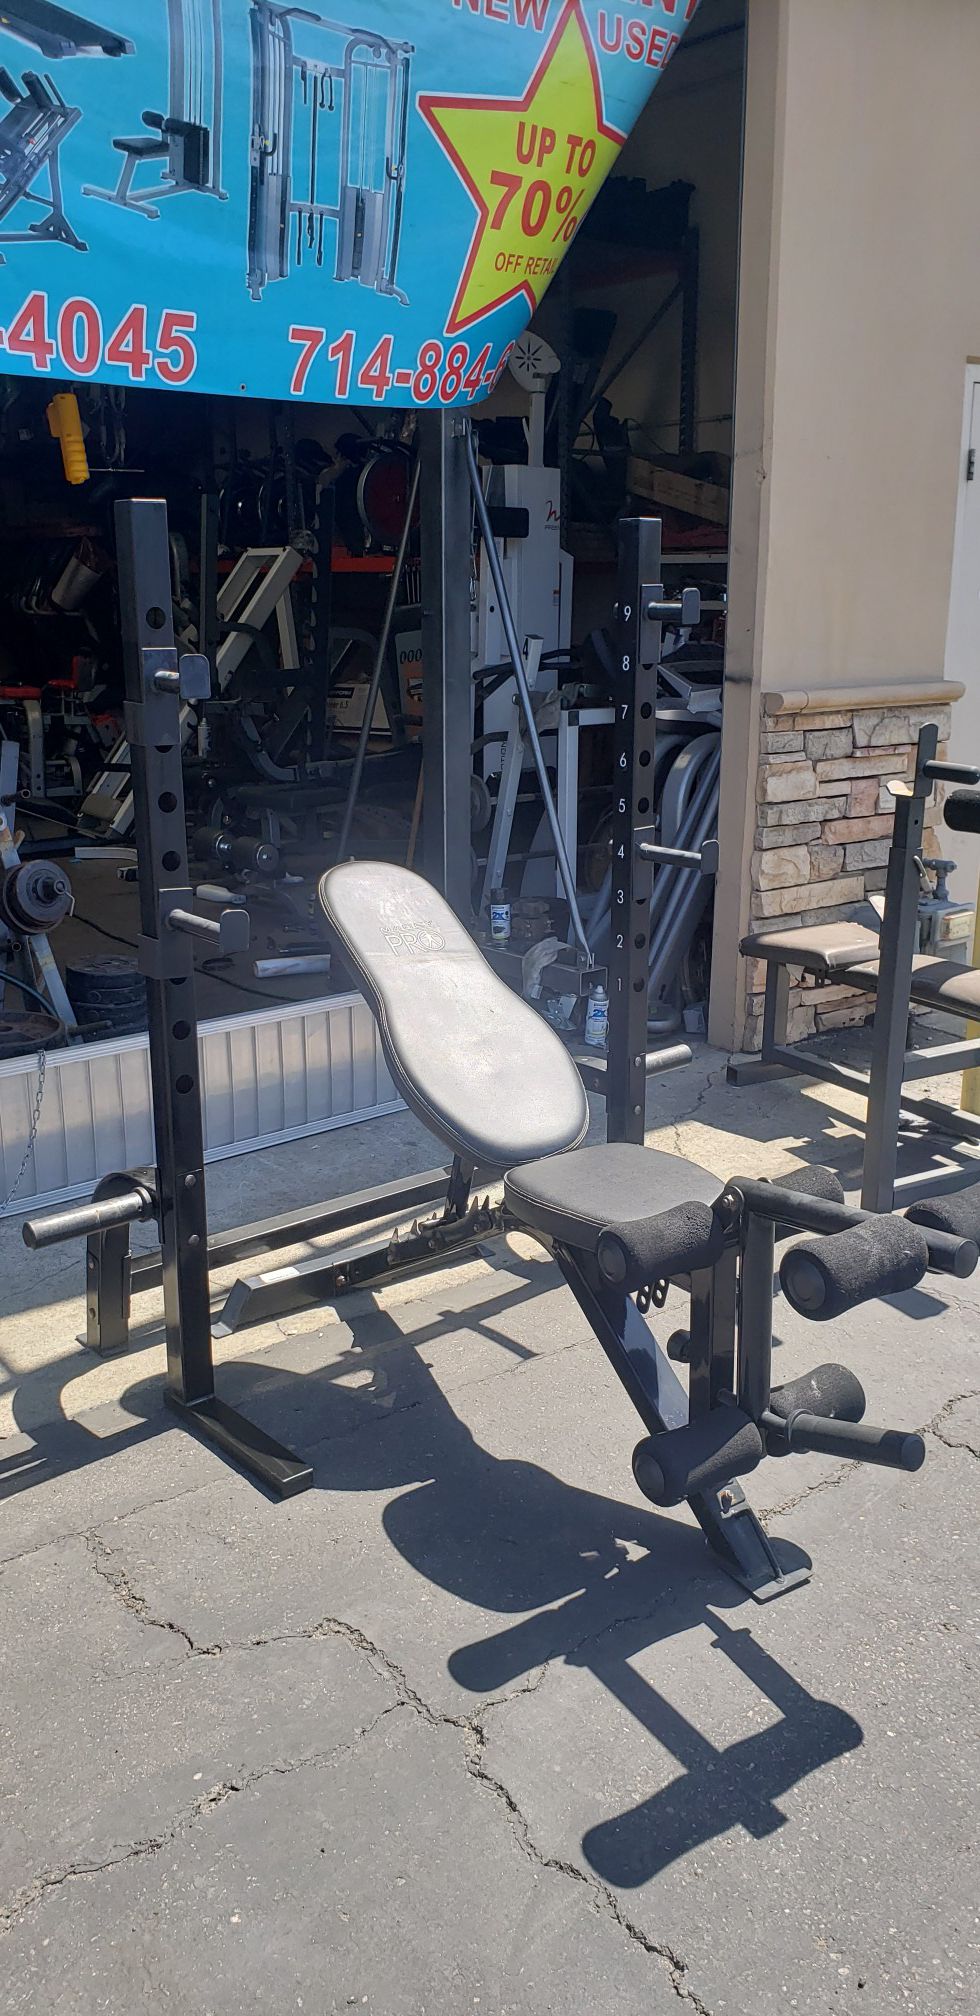 Squat rack/bench press with bench, bar and weights